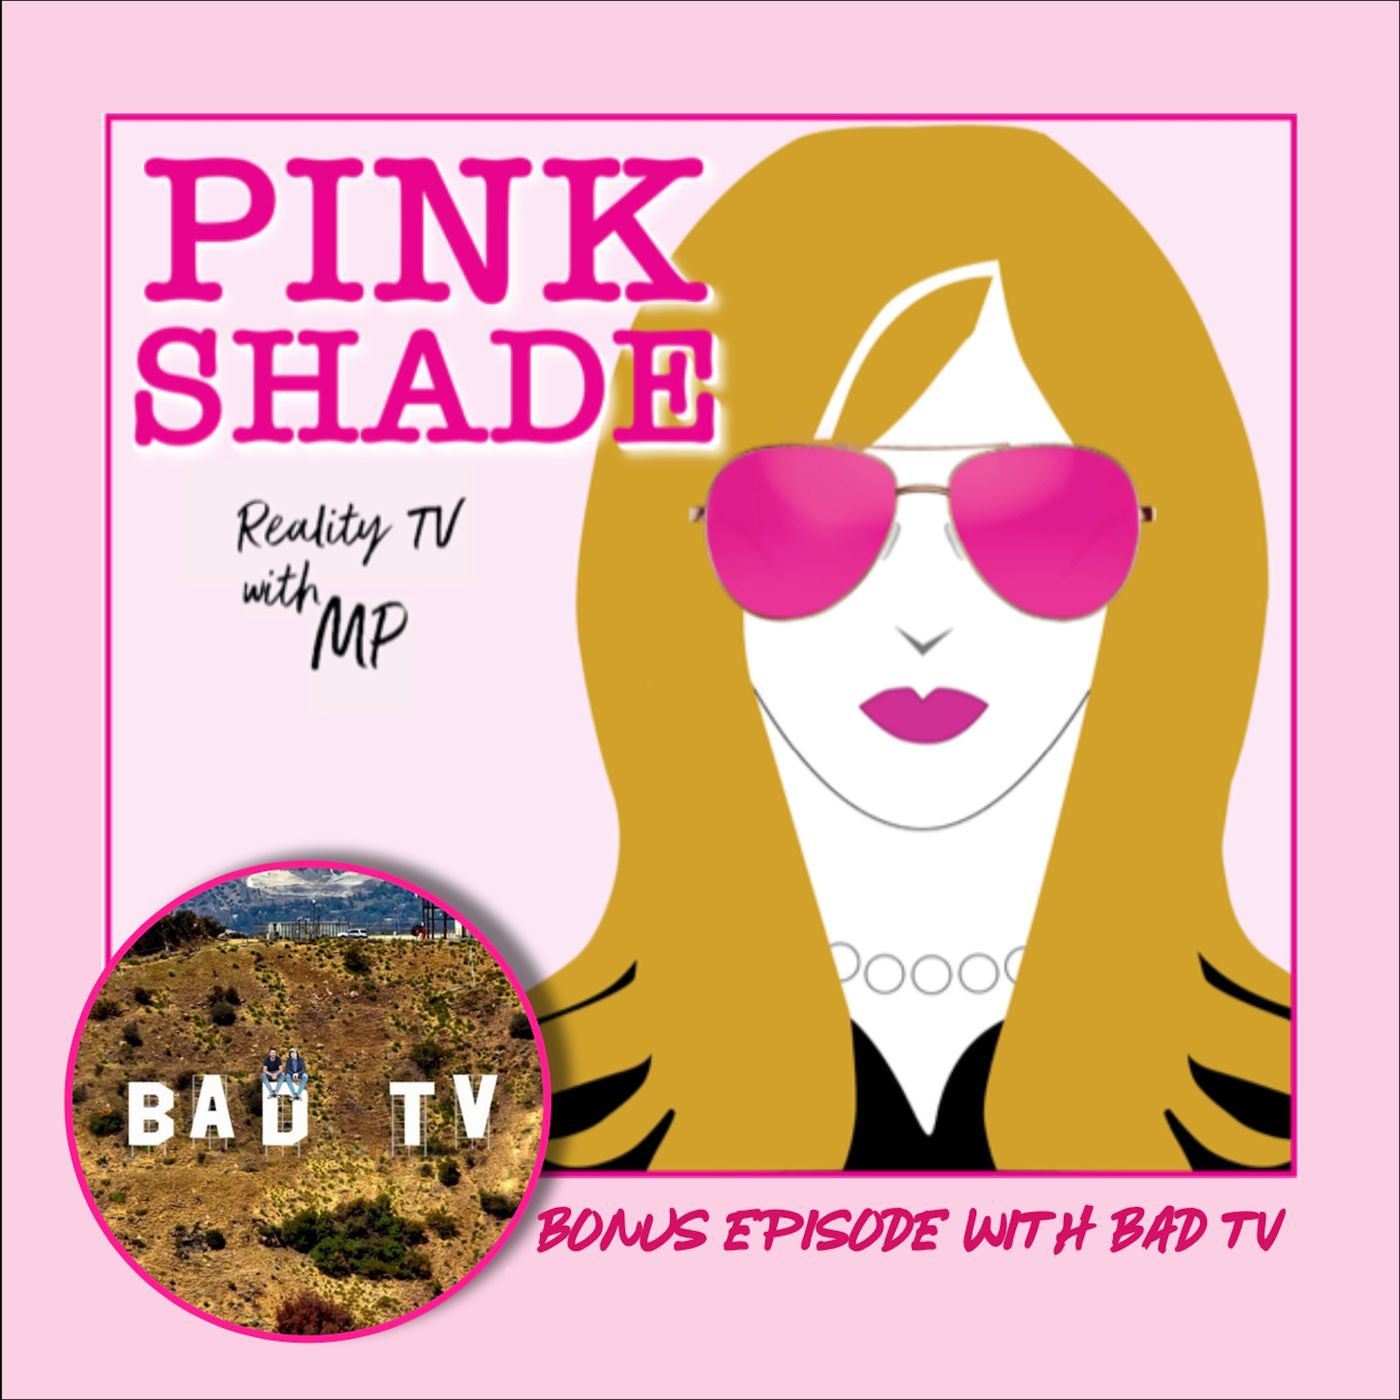 BONUS EPISODE: MP chats 90 Day Fiance: The Single Life Tell All (pt 3) with Dylan and Pat from Bad TV!